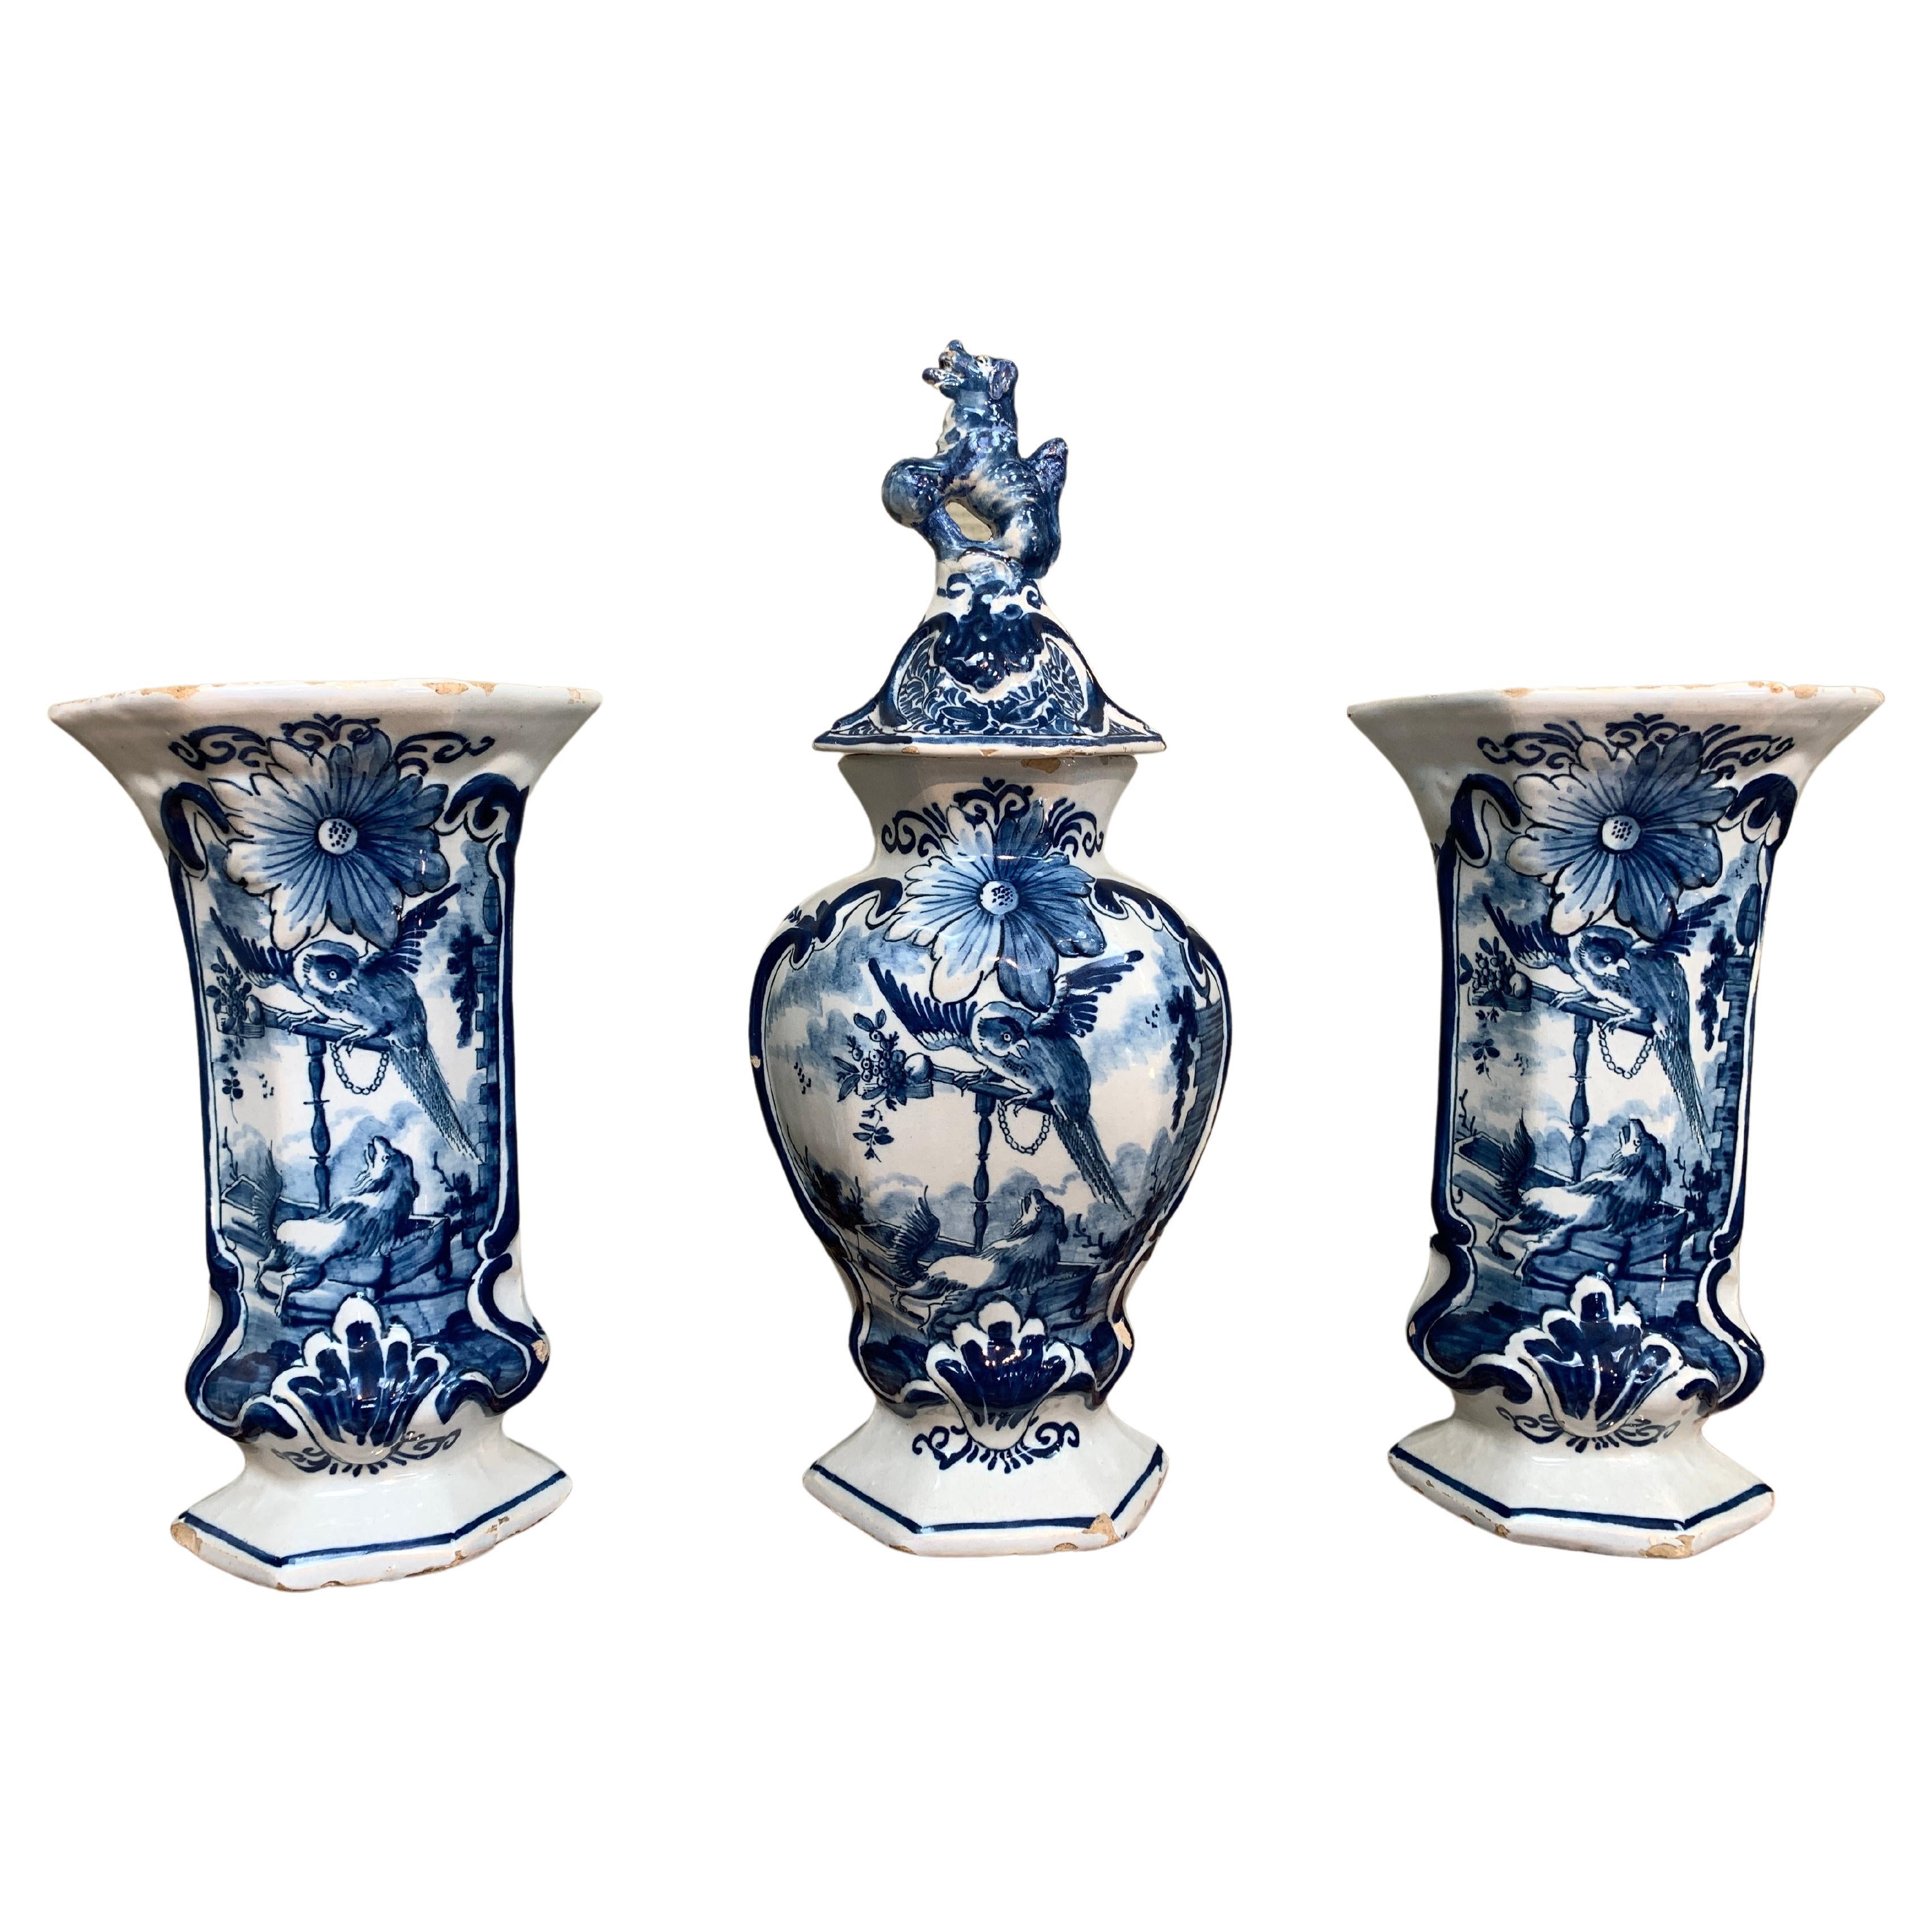 1760s Vases and Vessels